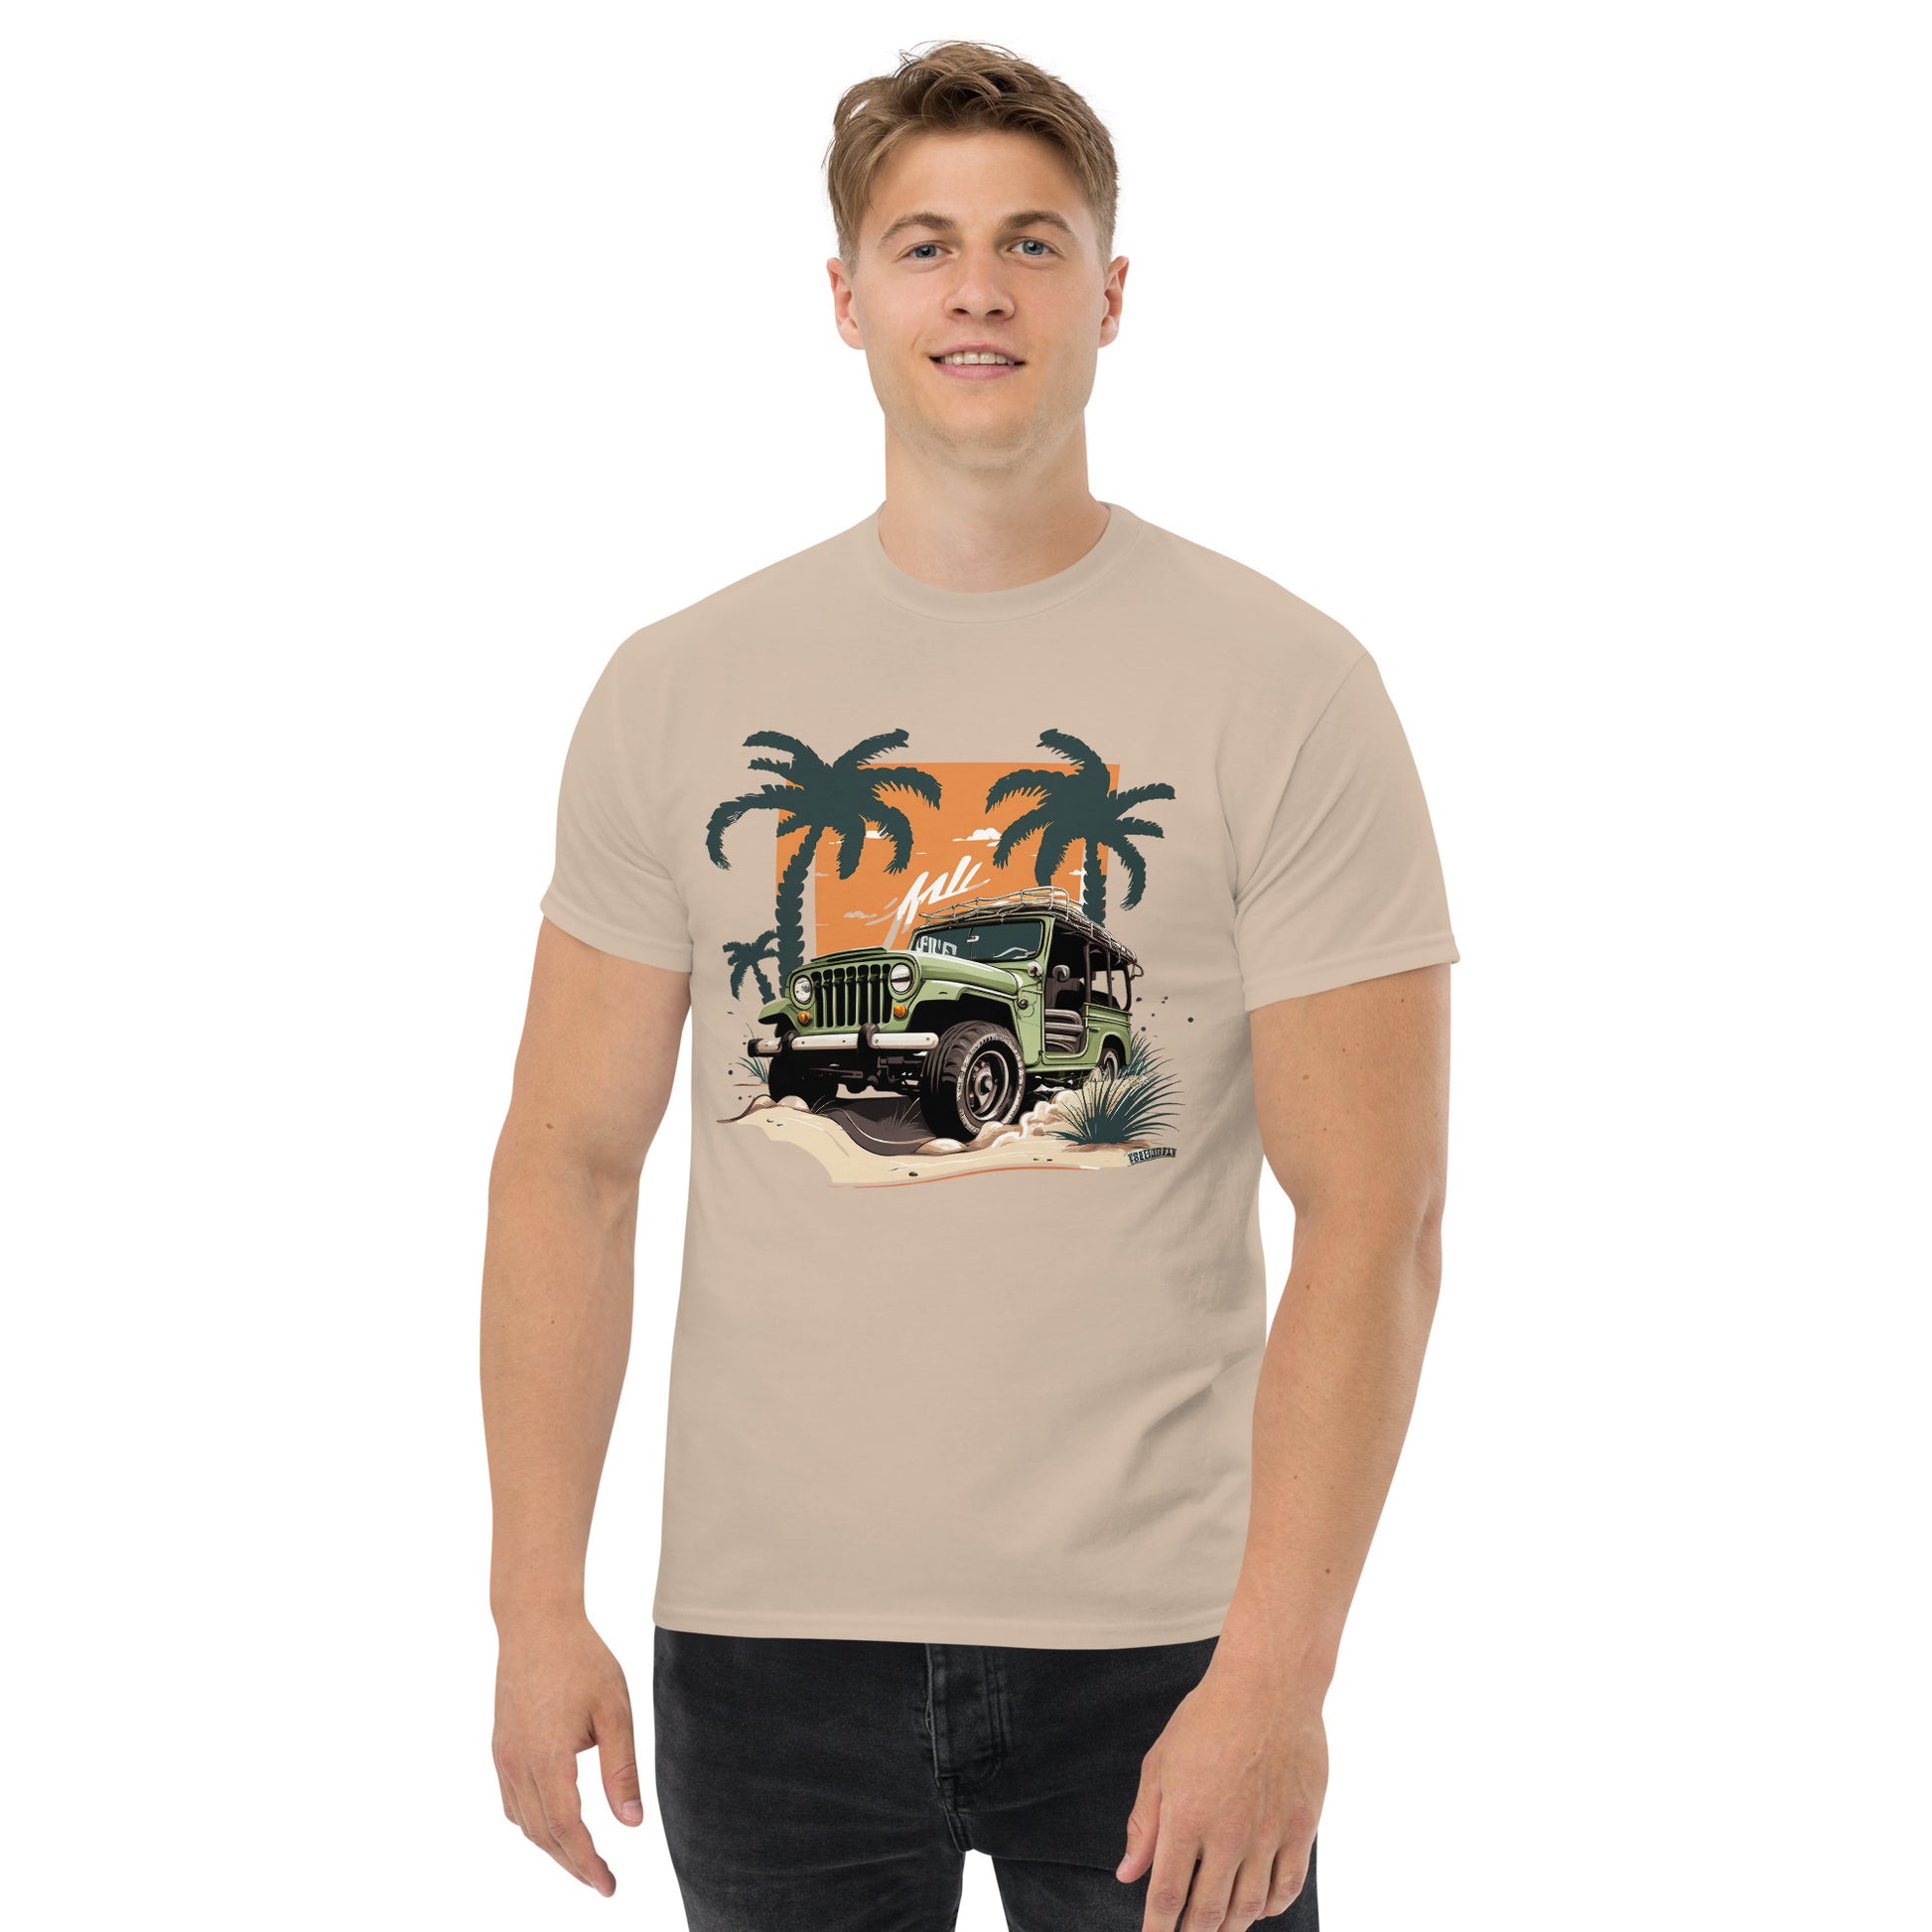 man with sand t-shirt with picture of jeep in front of palm trees 